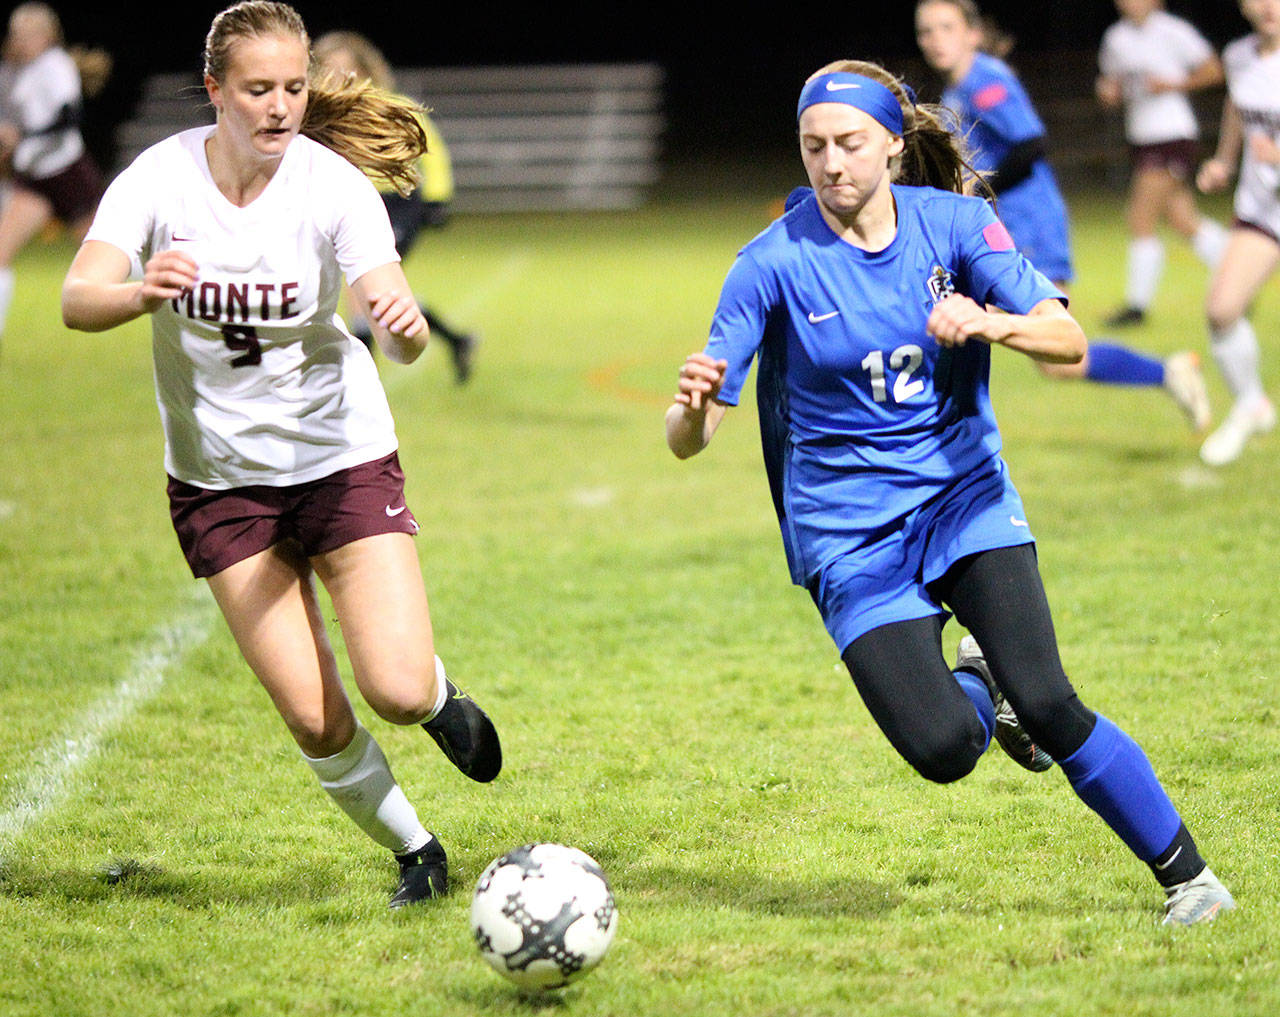 Elma’s Jillian Bieker, right, and Montesano’s Madi Campbell battle for the ball near the sidelines in the second half of a match on Tuesday in Elma. (Hasani Grayson | Grays Harbor News Group)